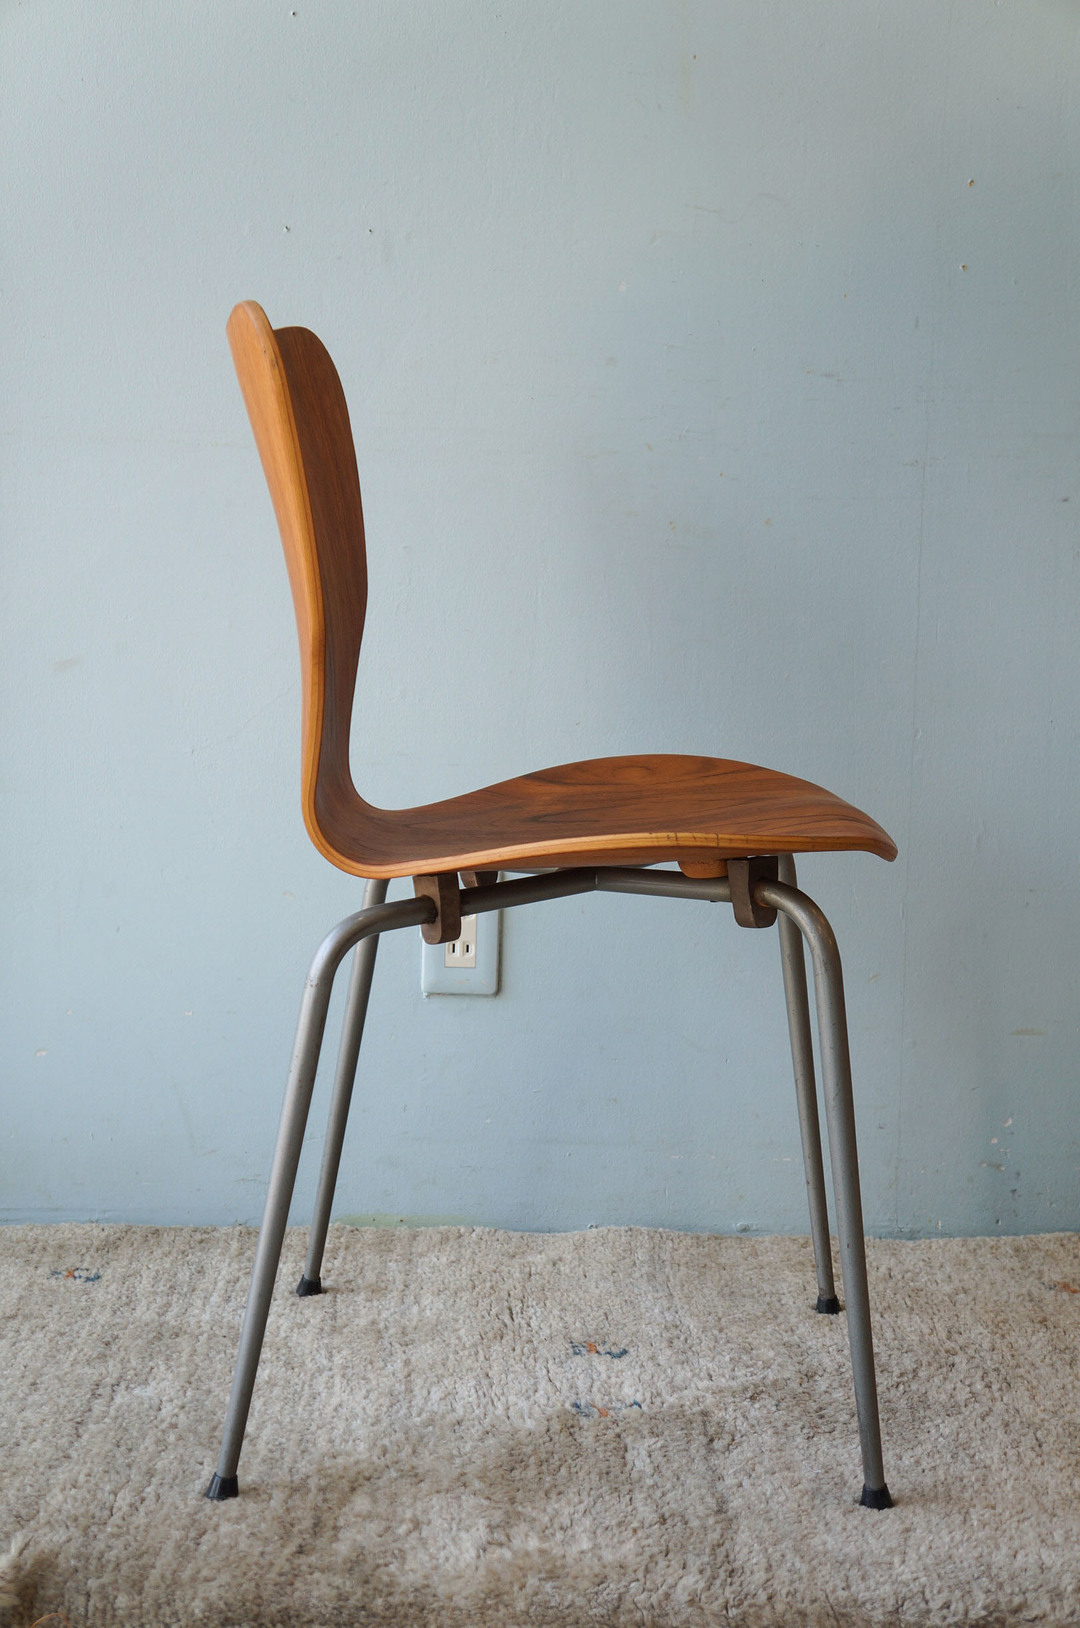 Danish Vintage Teak Plywood Stacking Chair MH Stålmøbler/デンマークヴィンテージ スタッキングチェア チーク材 プライウッド 椅子 ミッドセンチュリー モダン 北欧家具 5